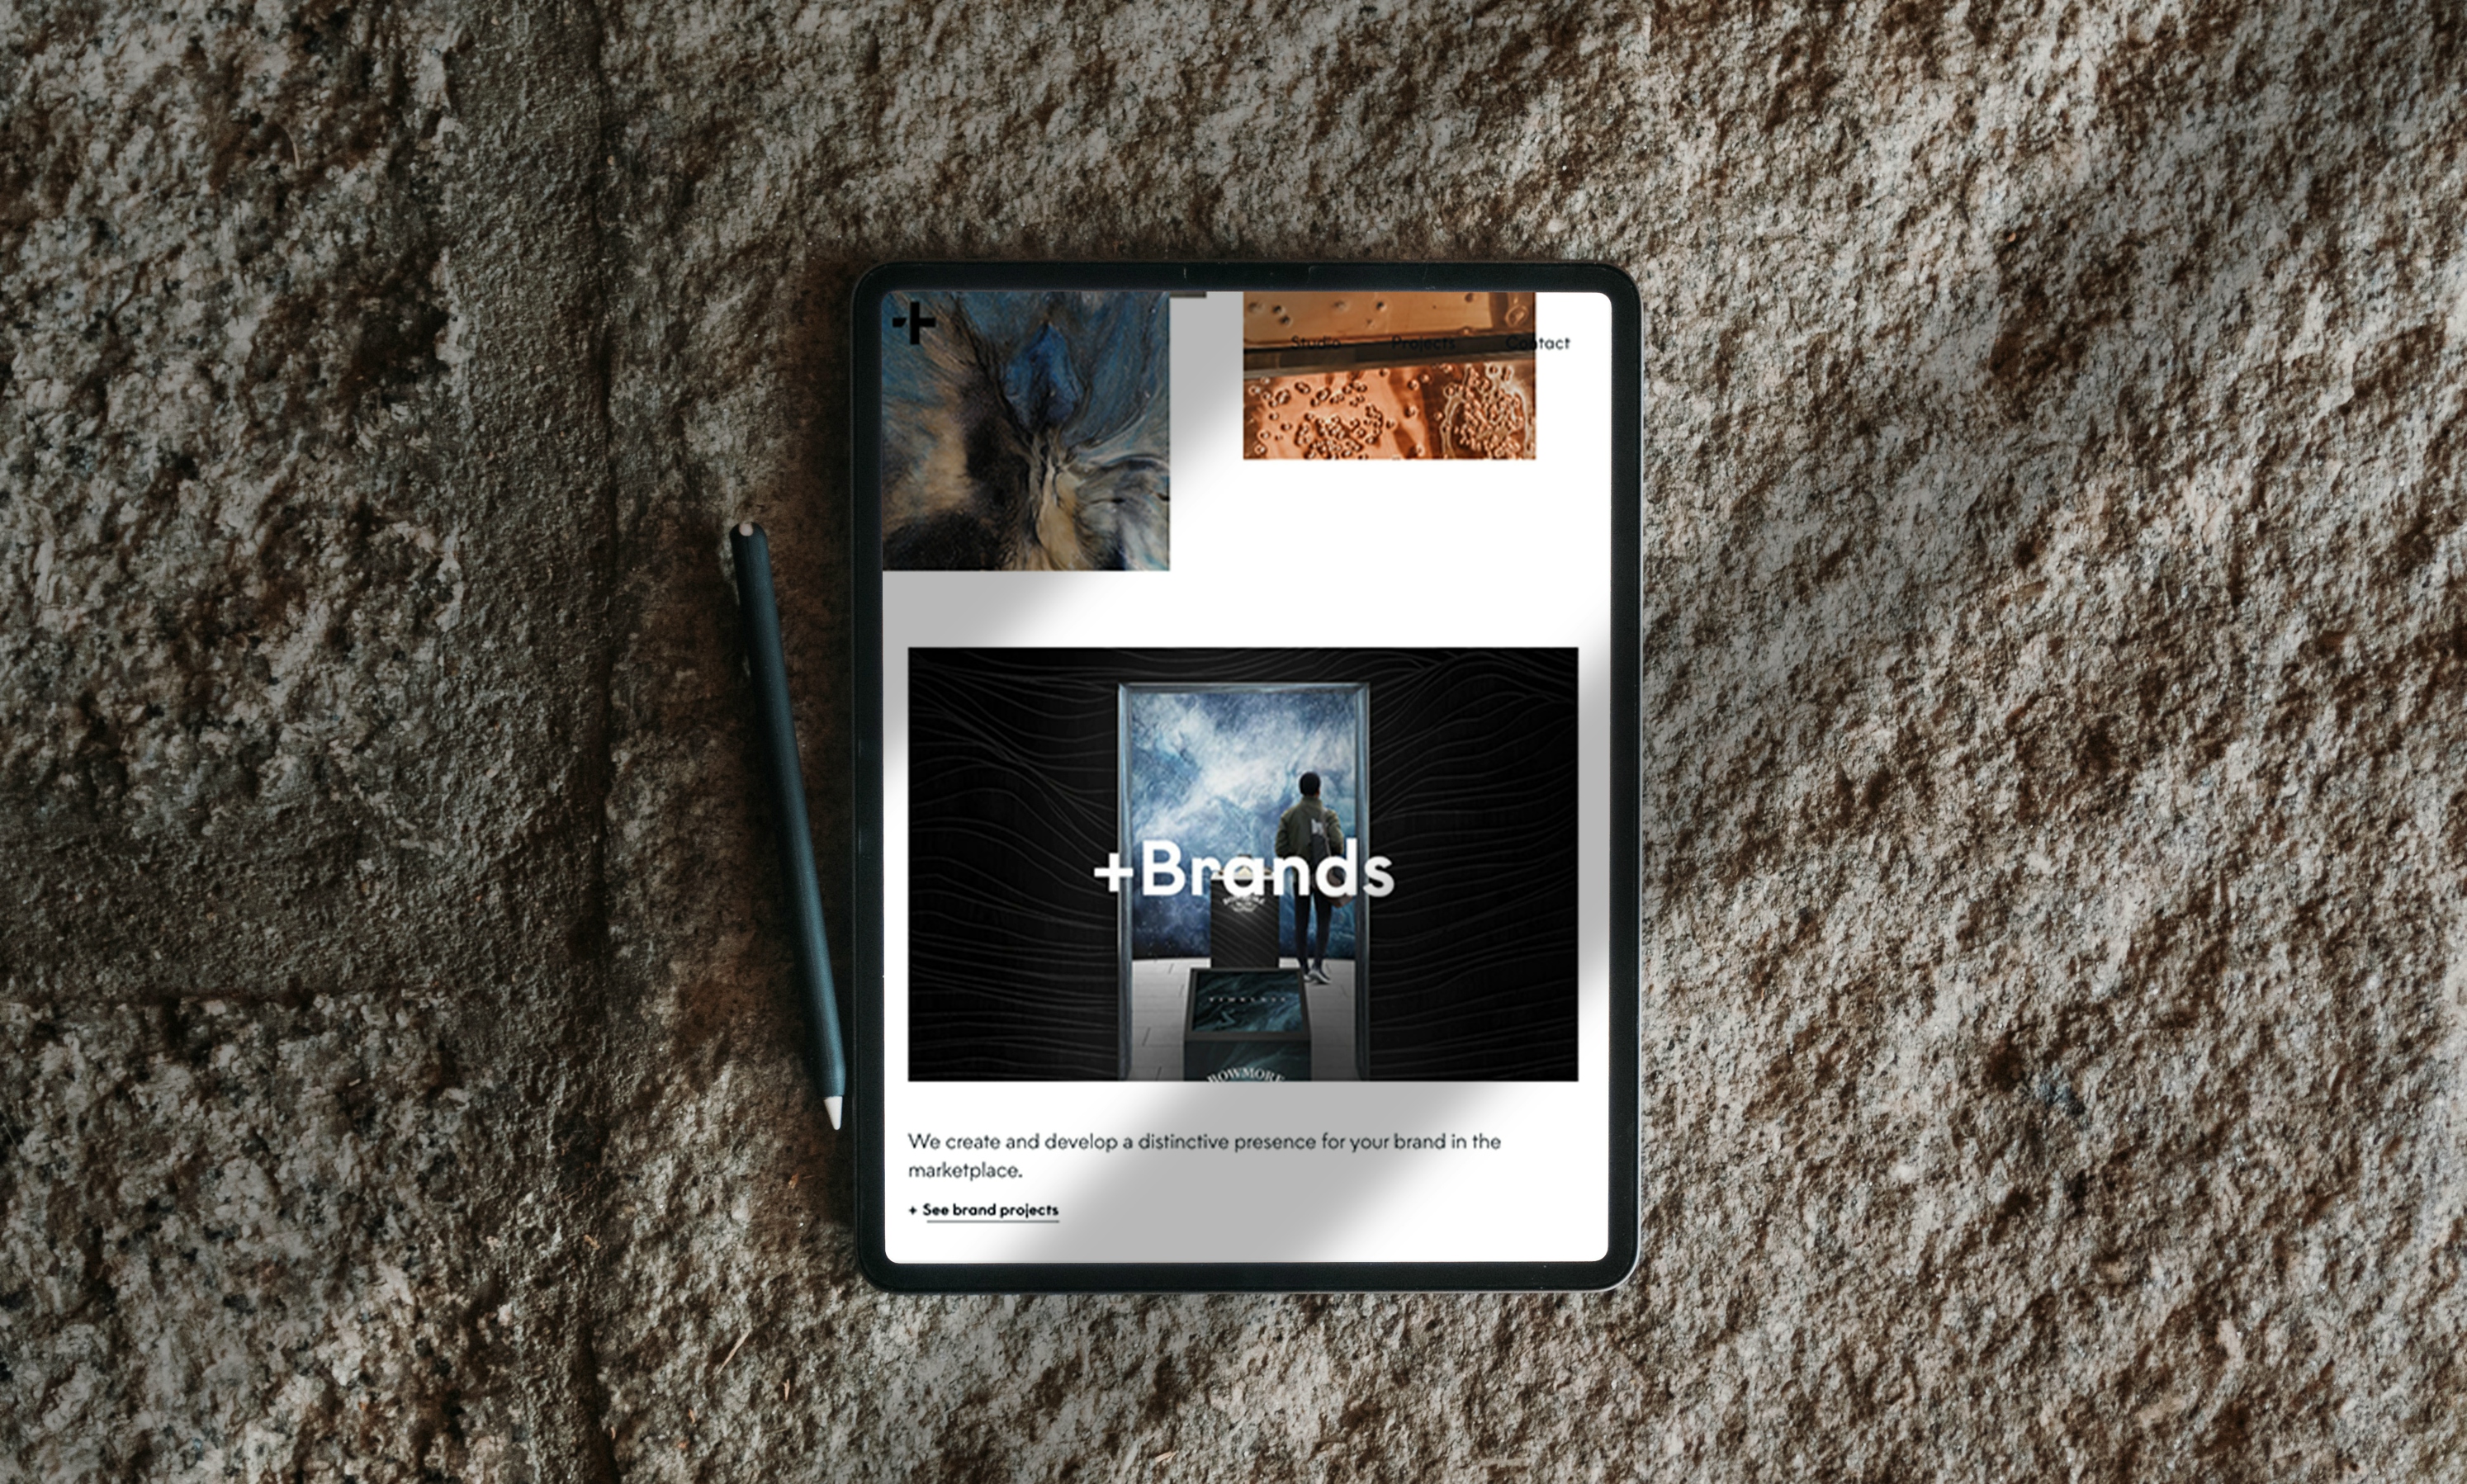 An image of sandstone with a tablet and pencil in the foreground. The tablet has a page on it. The main image is black with a door in it. Inside the door is a man looking on a sky background. “+Brands” is in white over the door. Under the image “We create and develop a distinctive presence for your brand in the marketplace”. There is a link under this stating “See brand products”